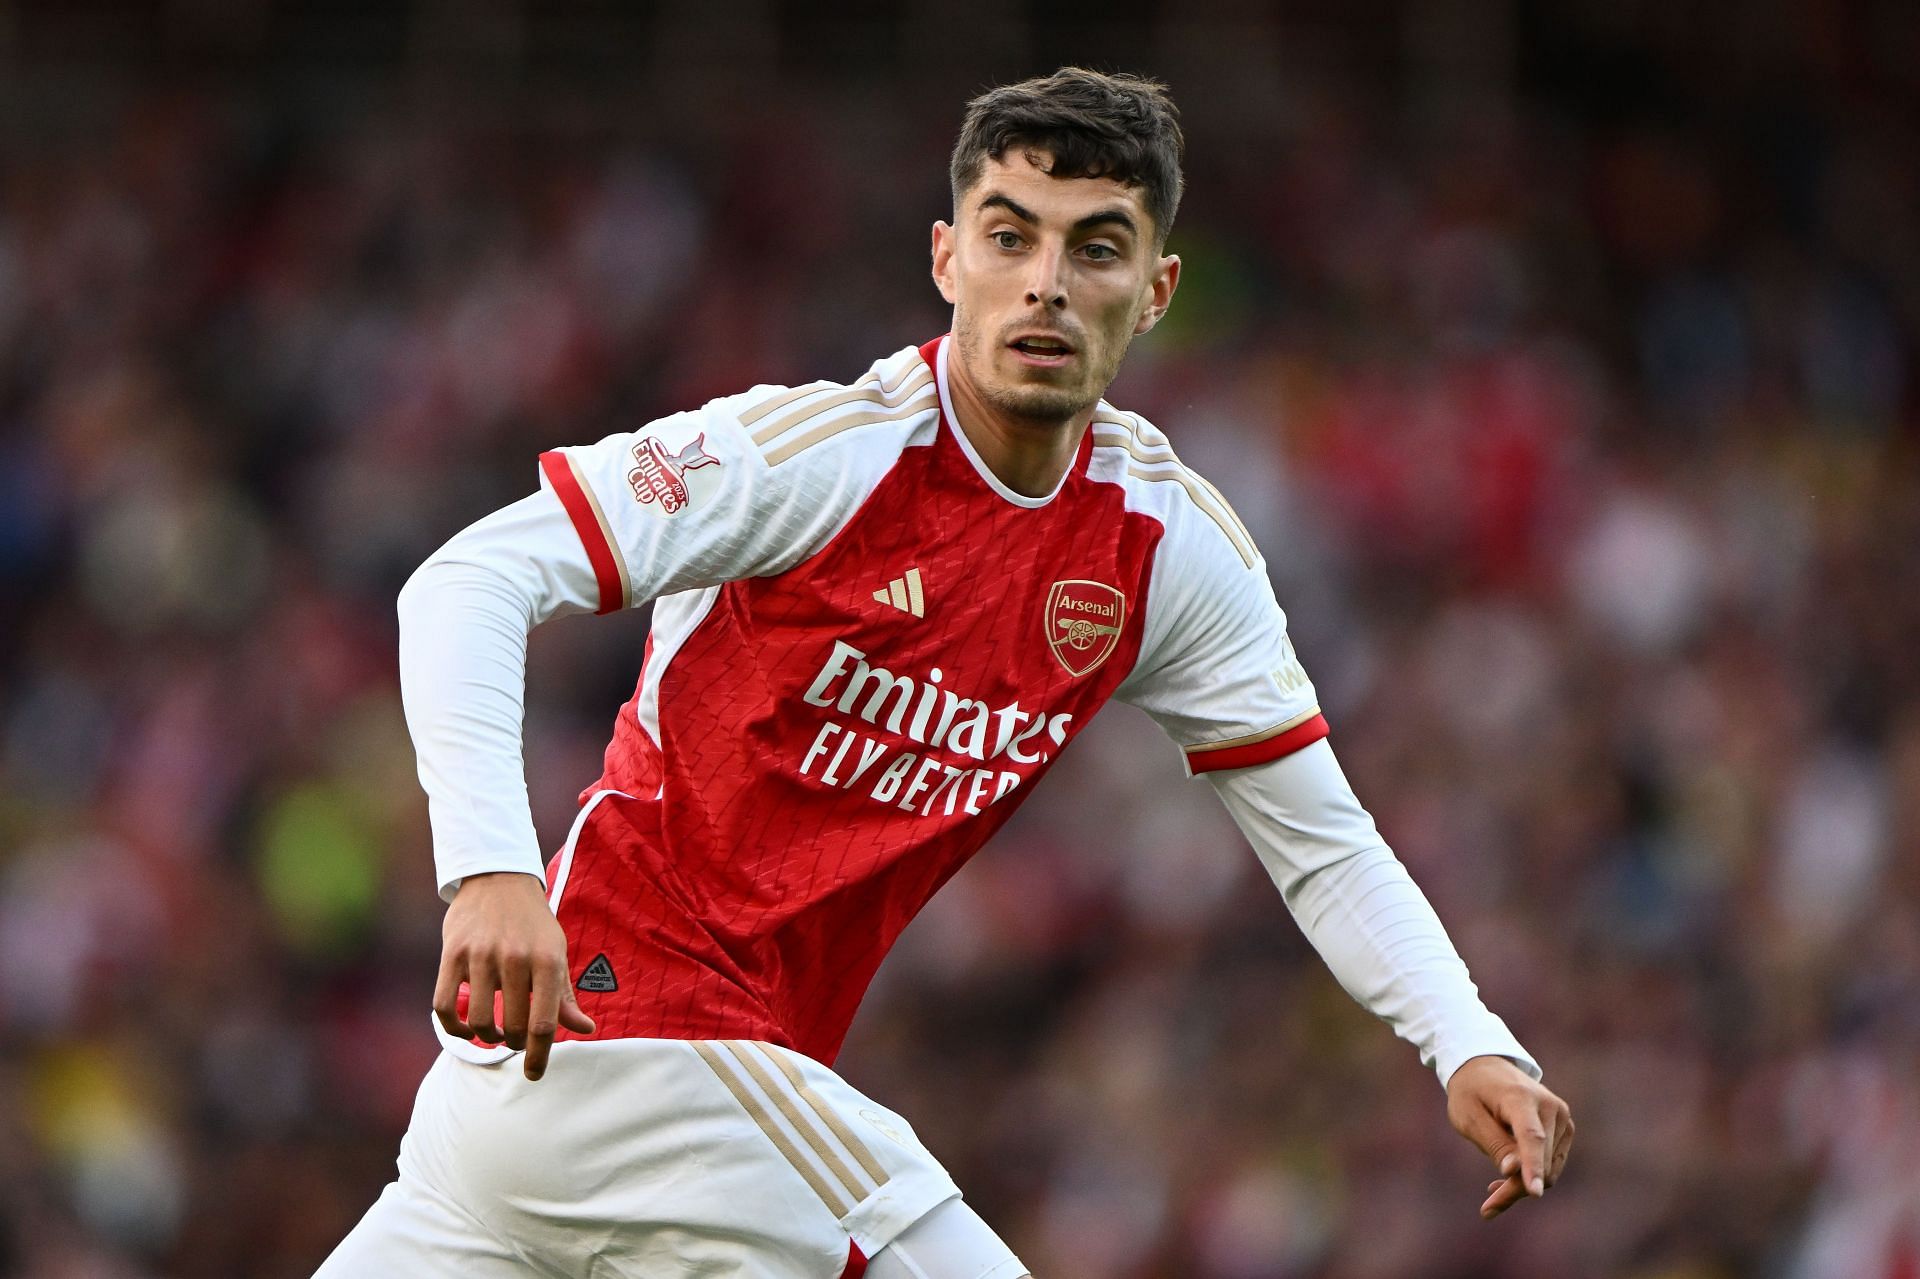 Kai Havertz has arrived at the Emirates this summer.